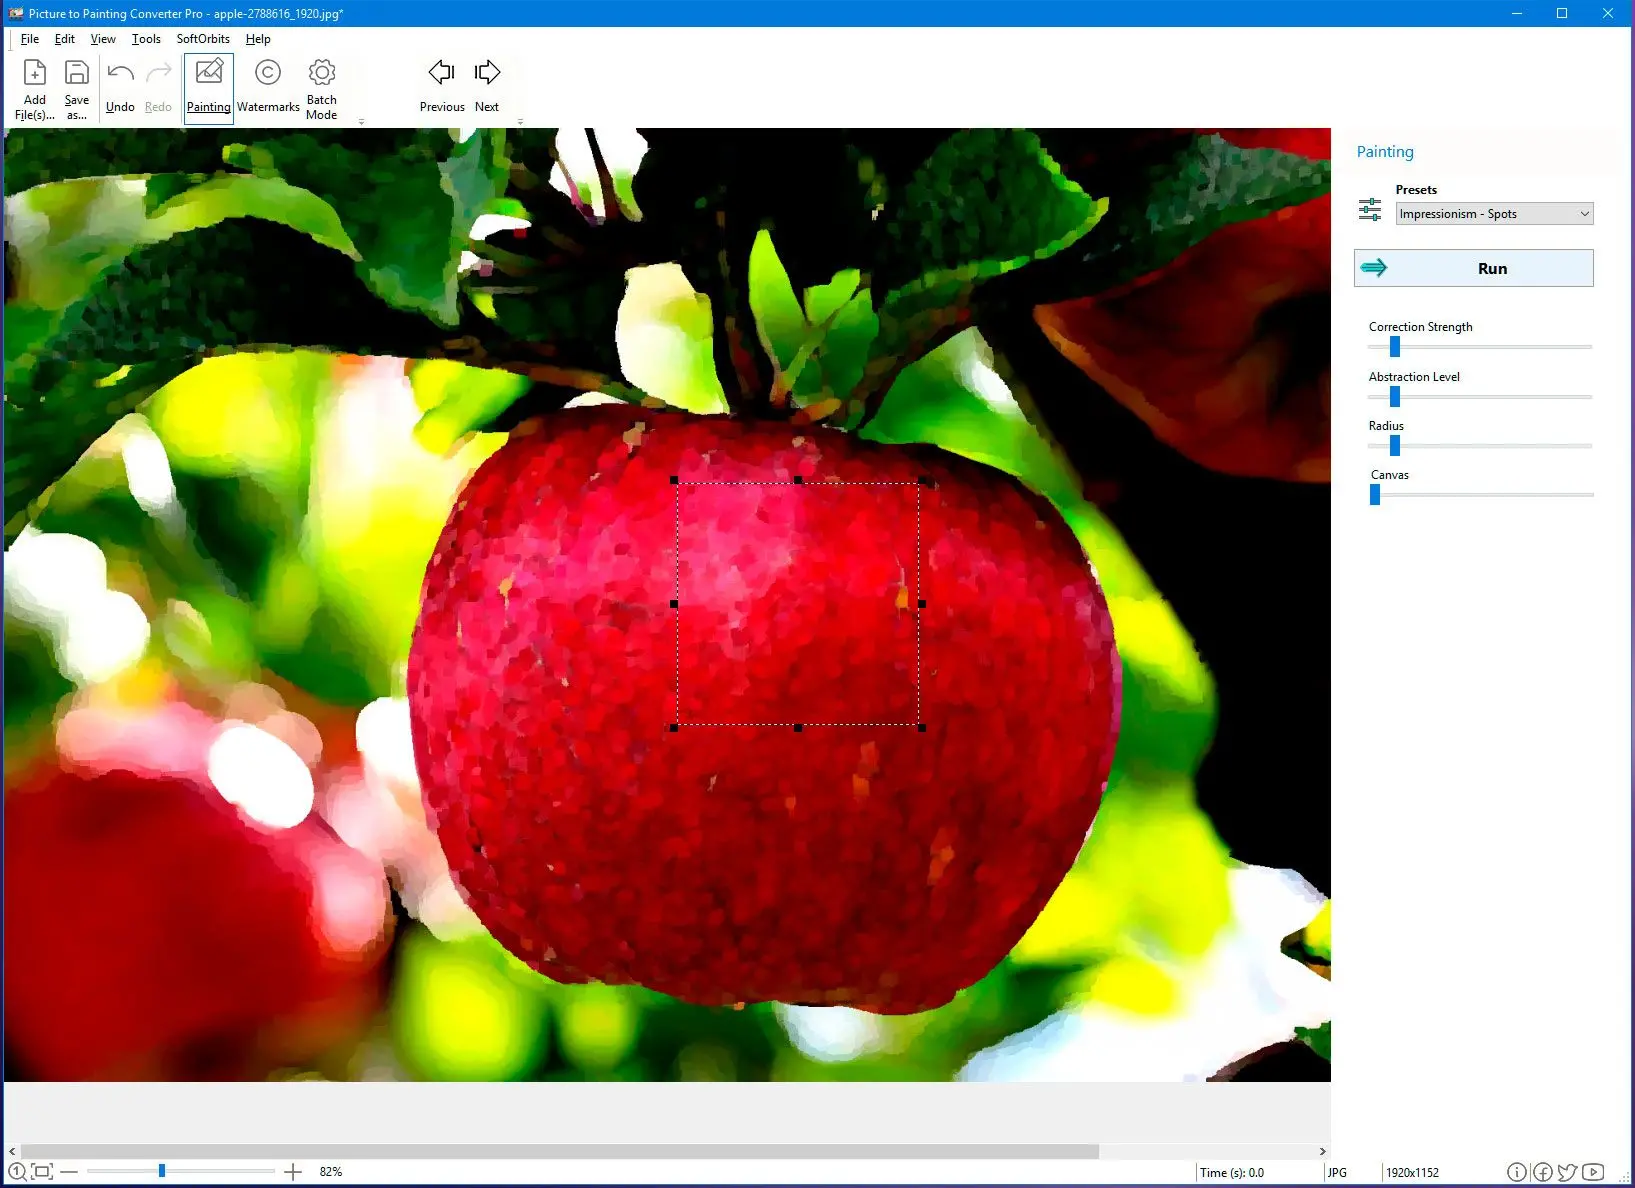 Picture to Painting Converter Screenshot.